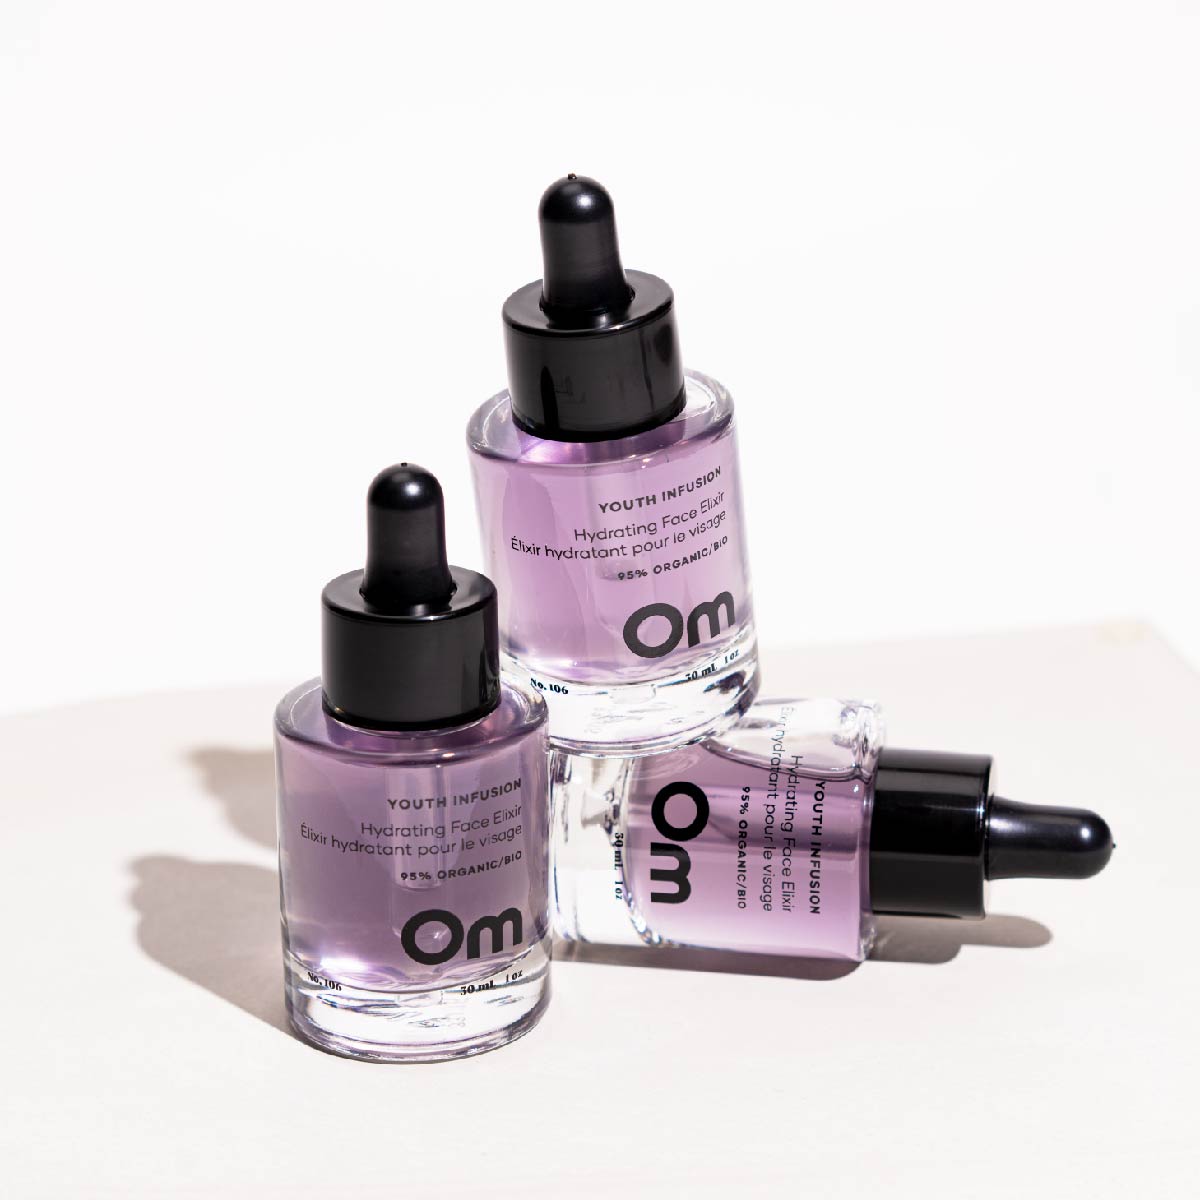 Om Organics - Youth Infusion - Hydrating Face Elixir